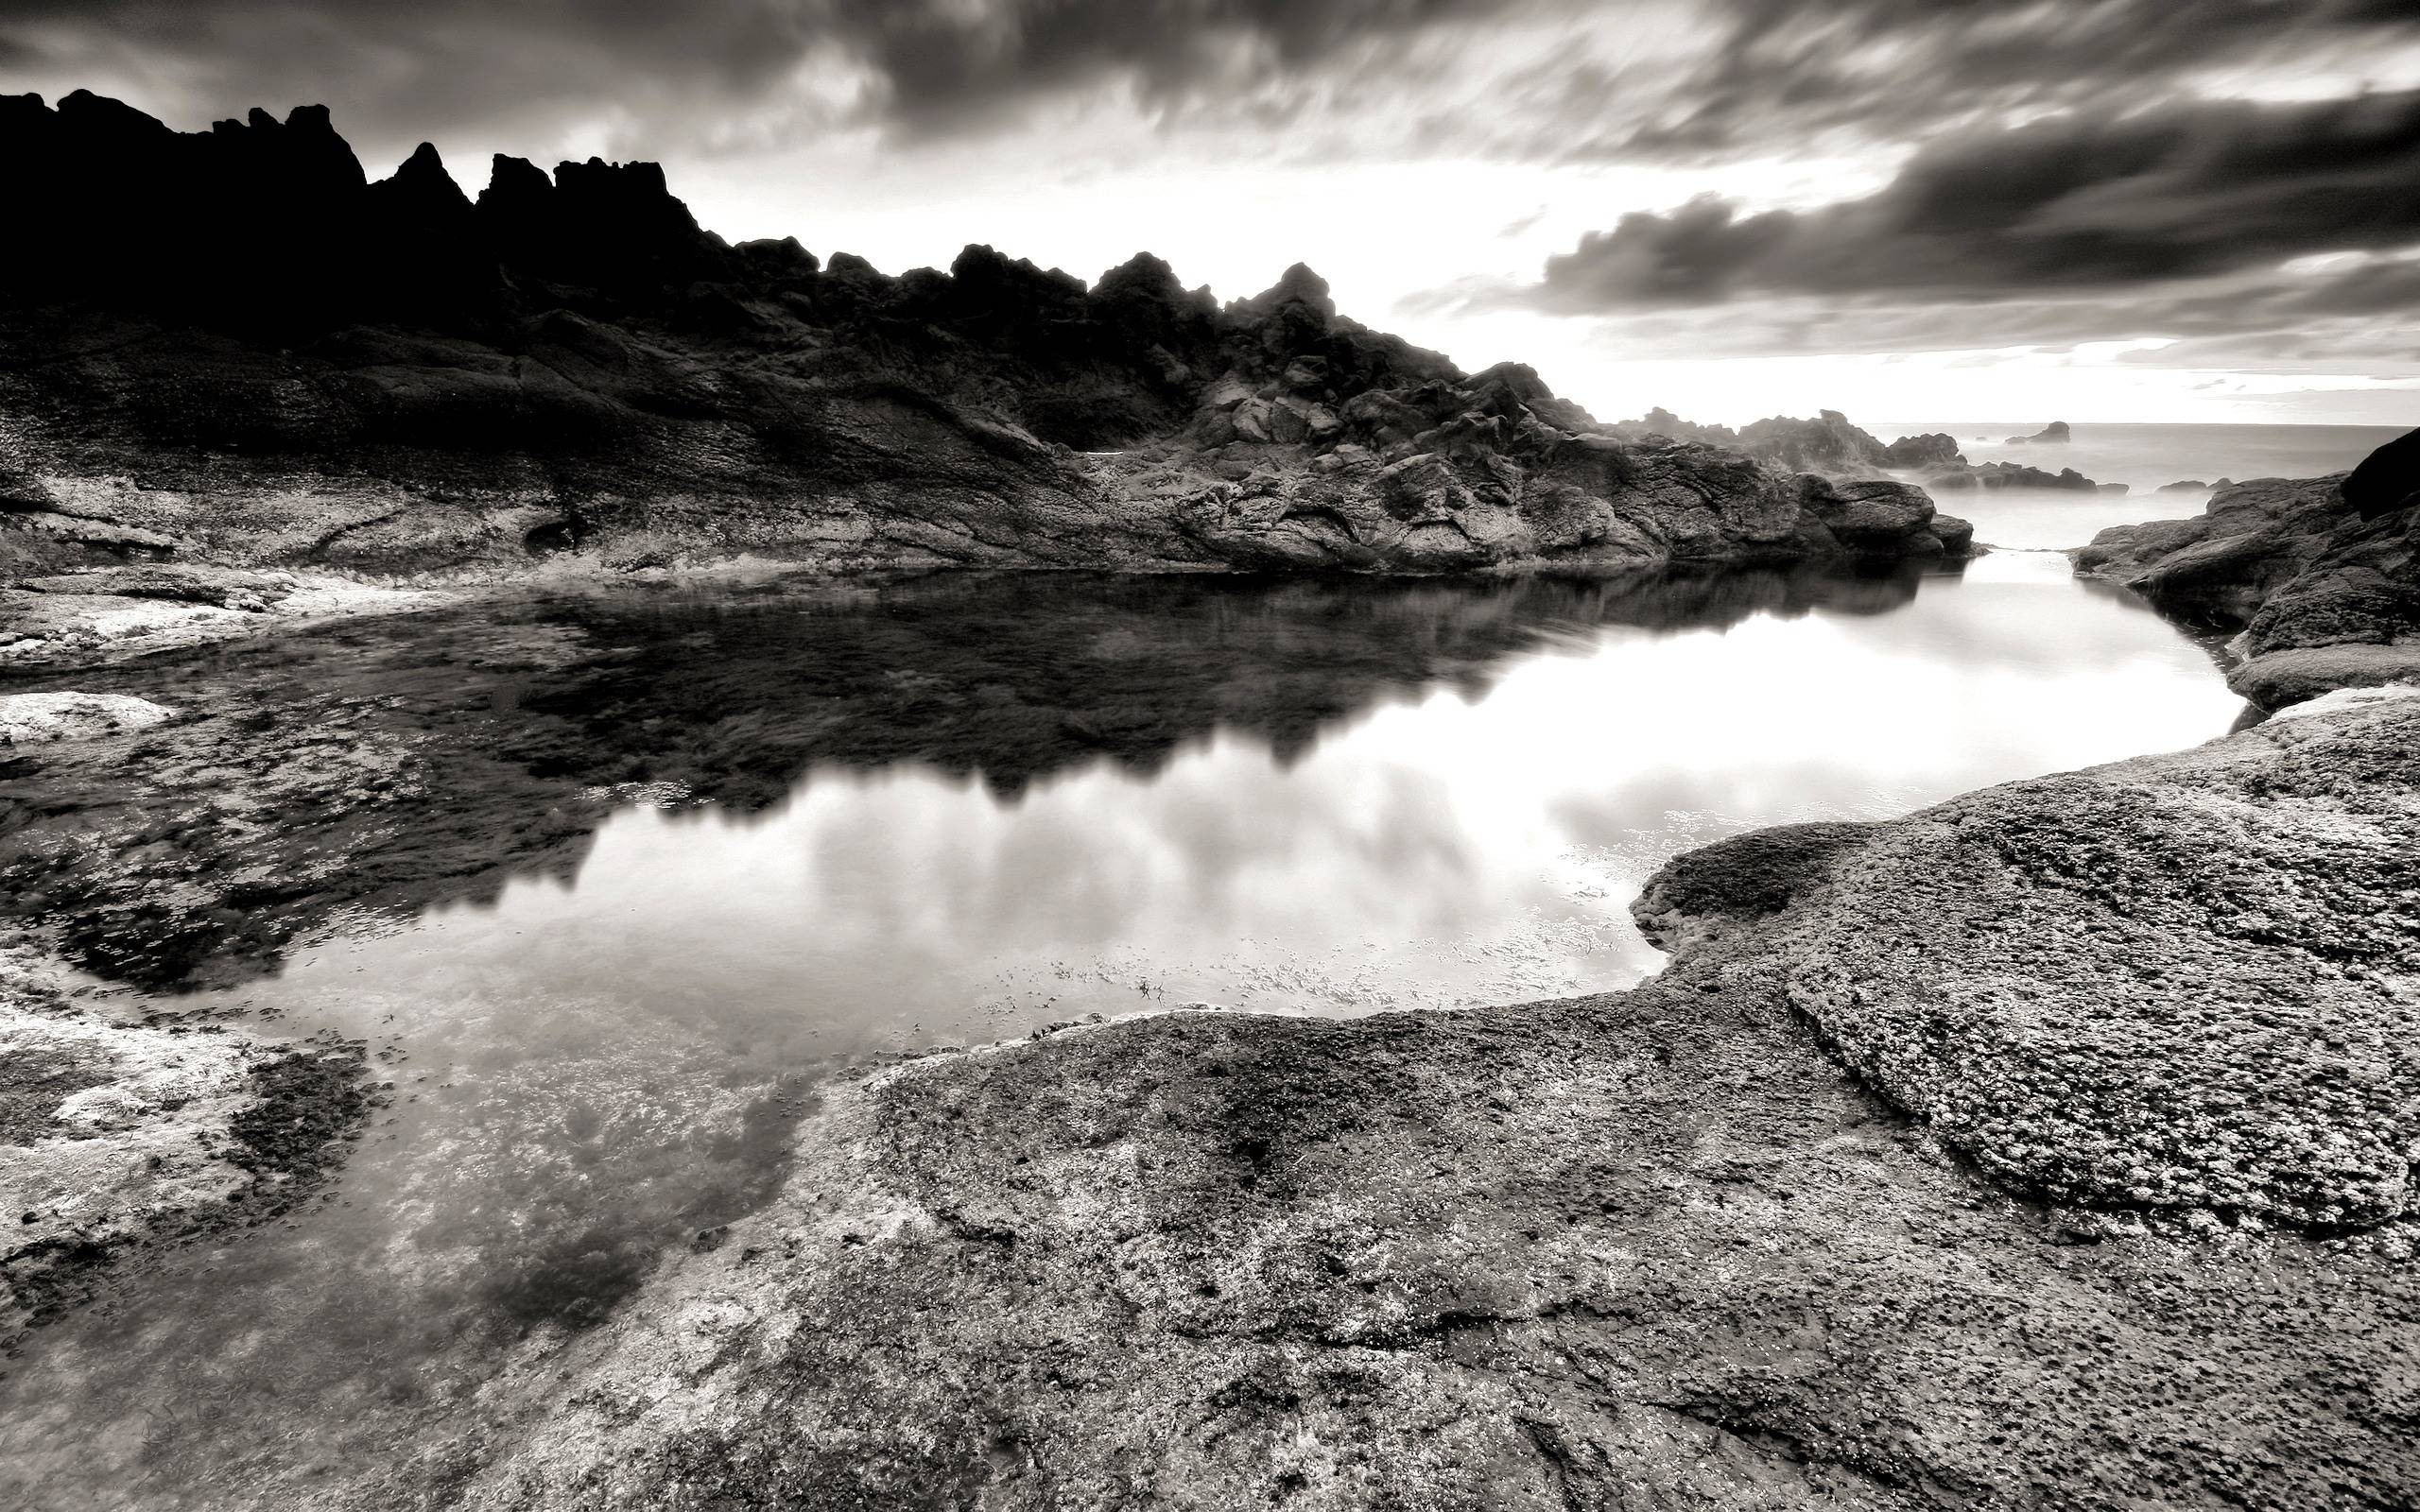 A black and white photo of rocks on the beach - Black and white, gray, lake